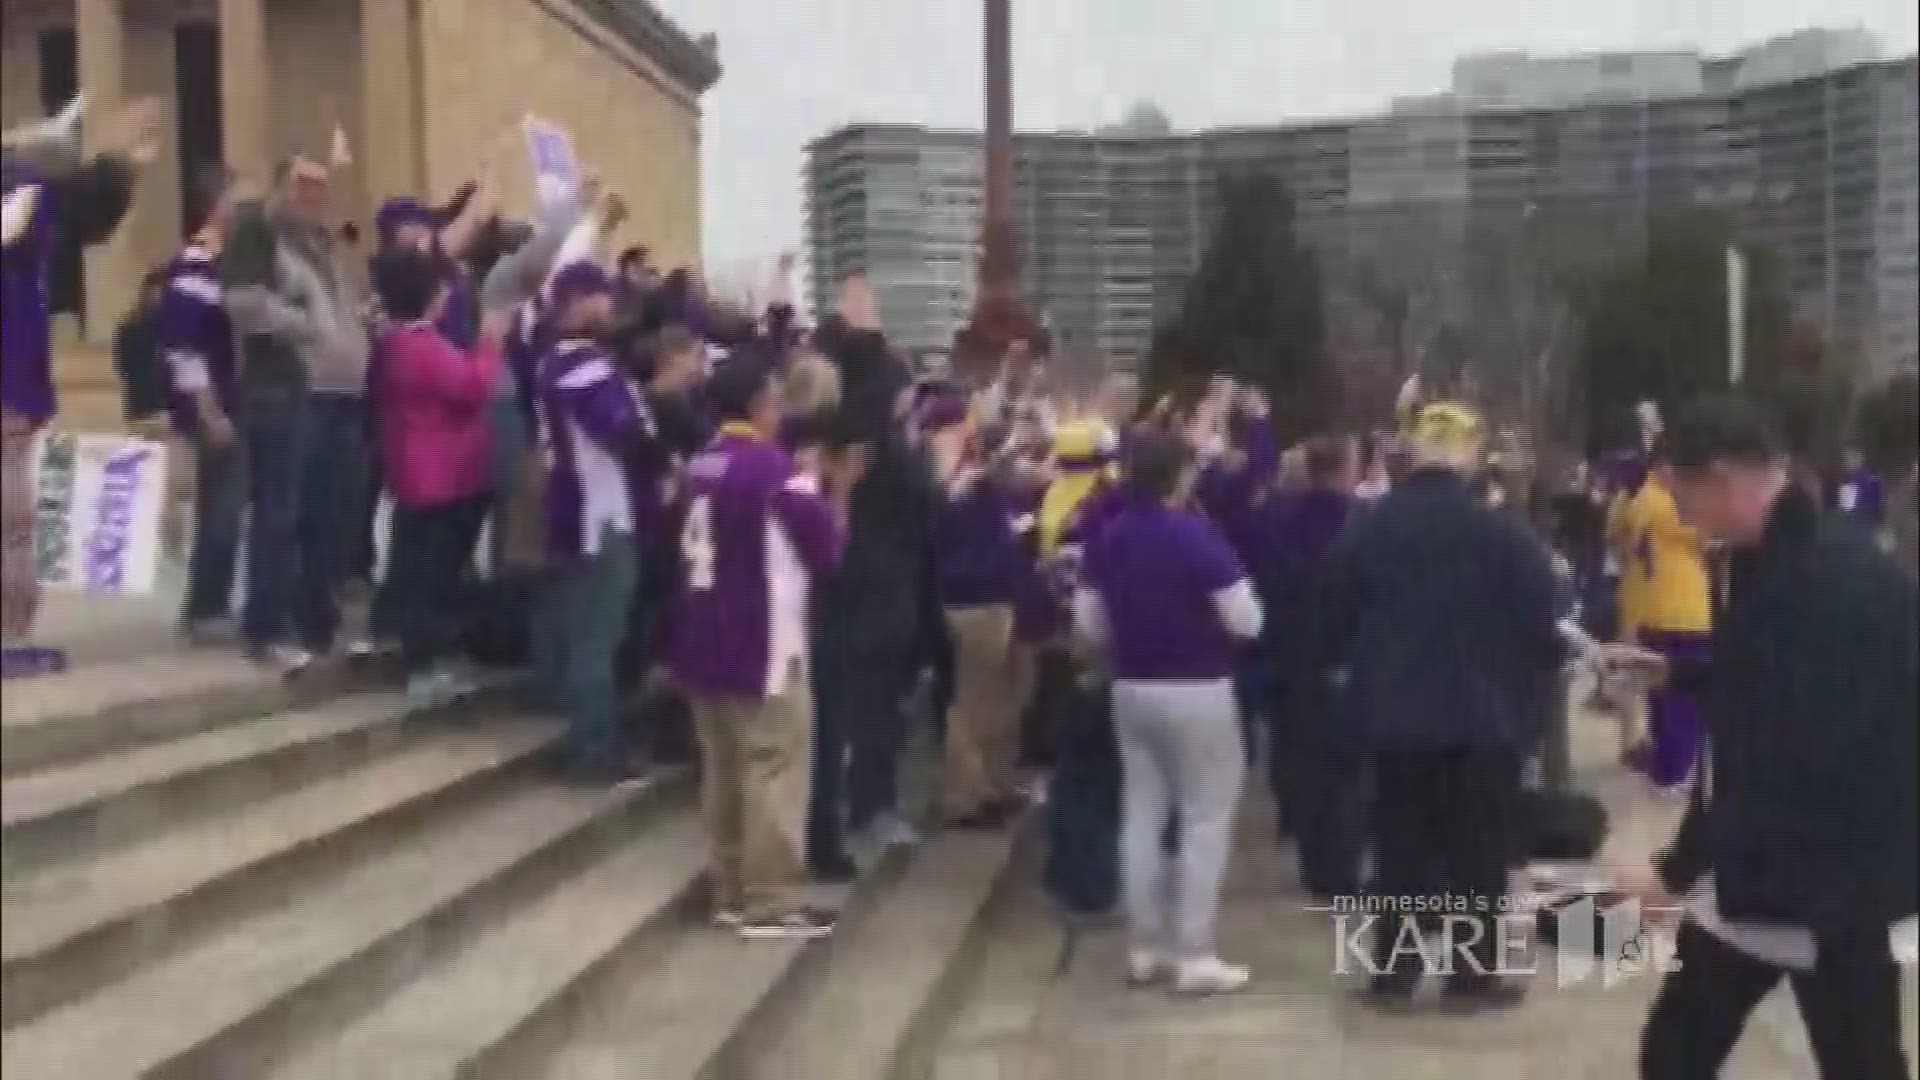 Vikings fans gathered on the Rocky steps at the Philadelphia Museum of Art for a giant SKOL chant Sunday morning ahead of the game against the Eagles. http://kare11.tv/2DWEZzX